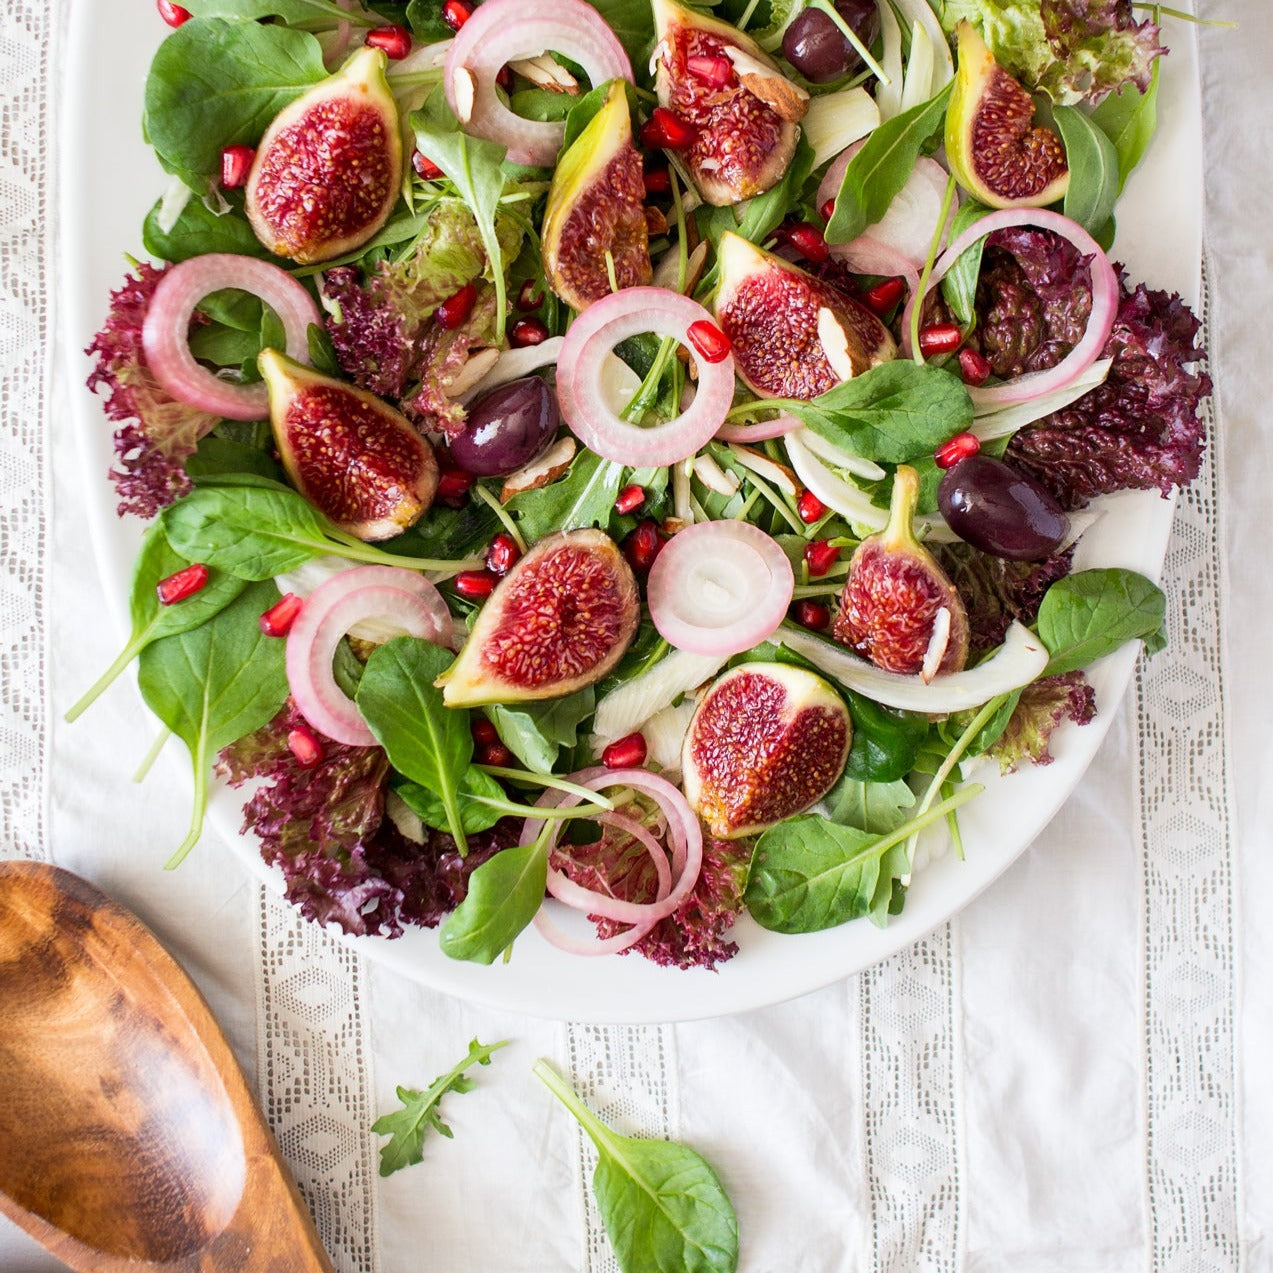 ARUGULA SALAD WITH FIGS & RED ONIONS